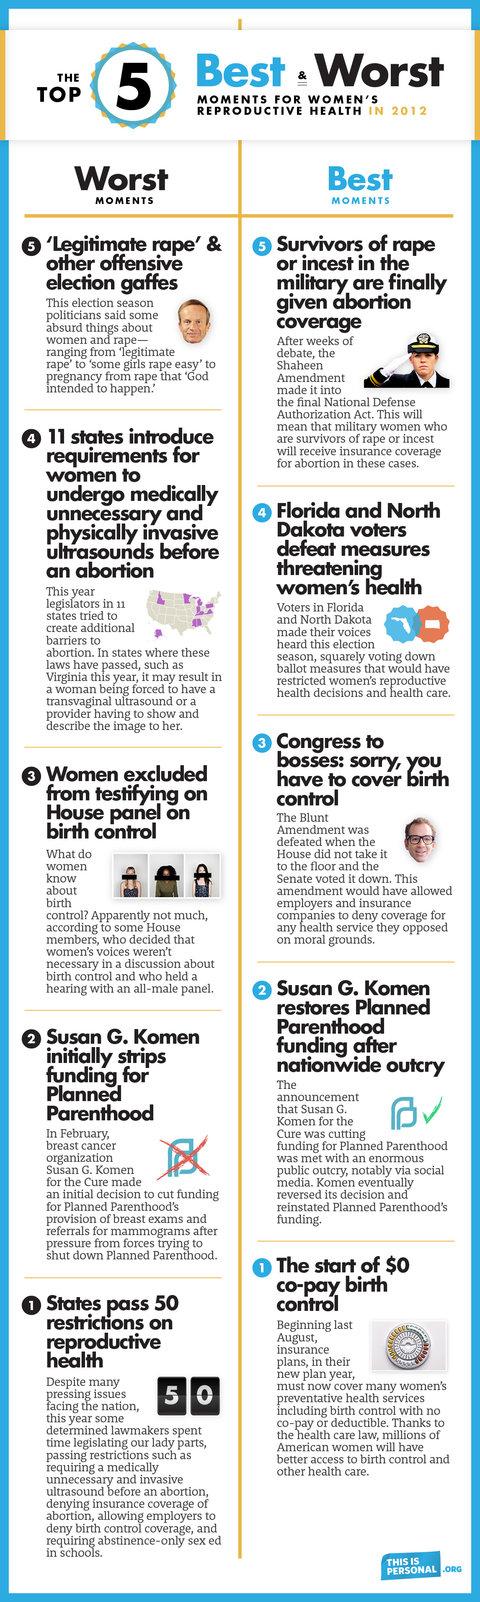 Best and Worst Moments for Women's Reproduction Health in 2012